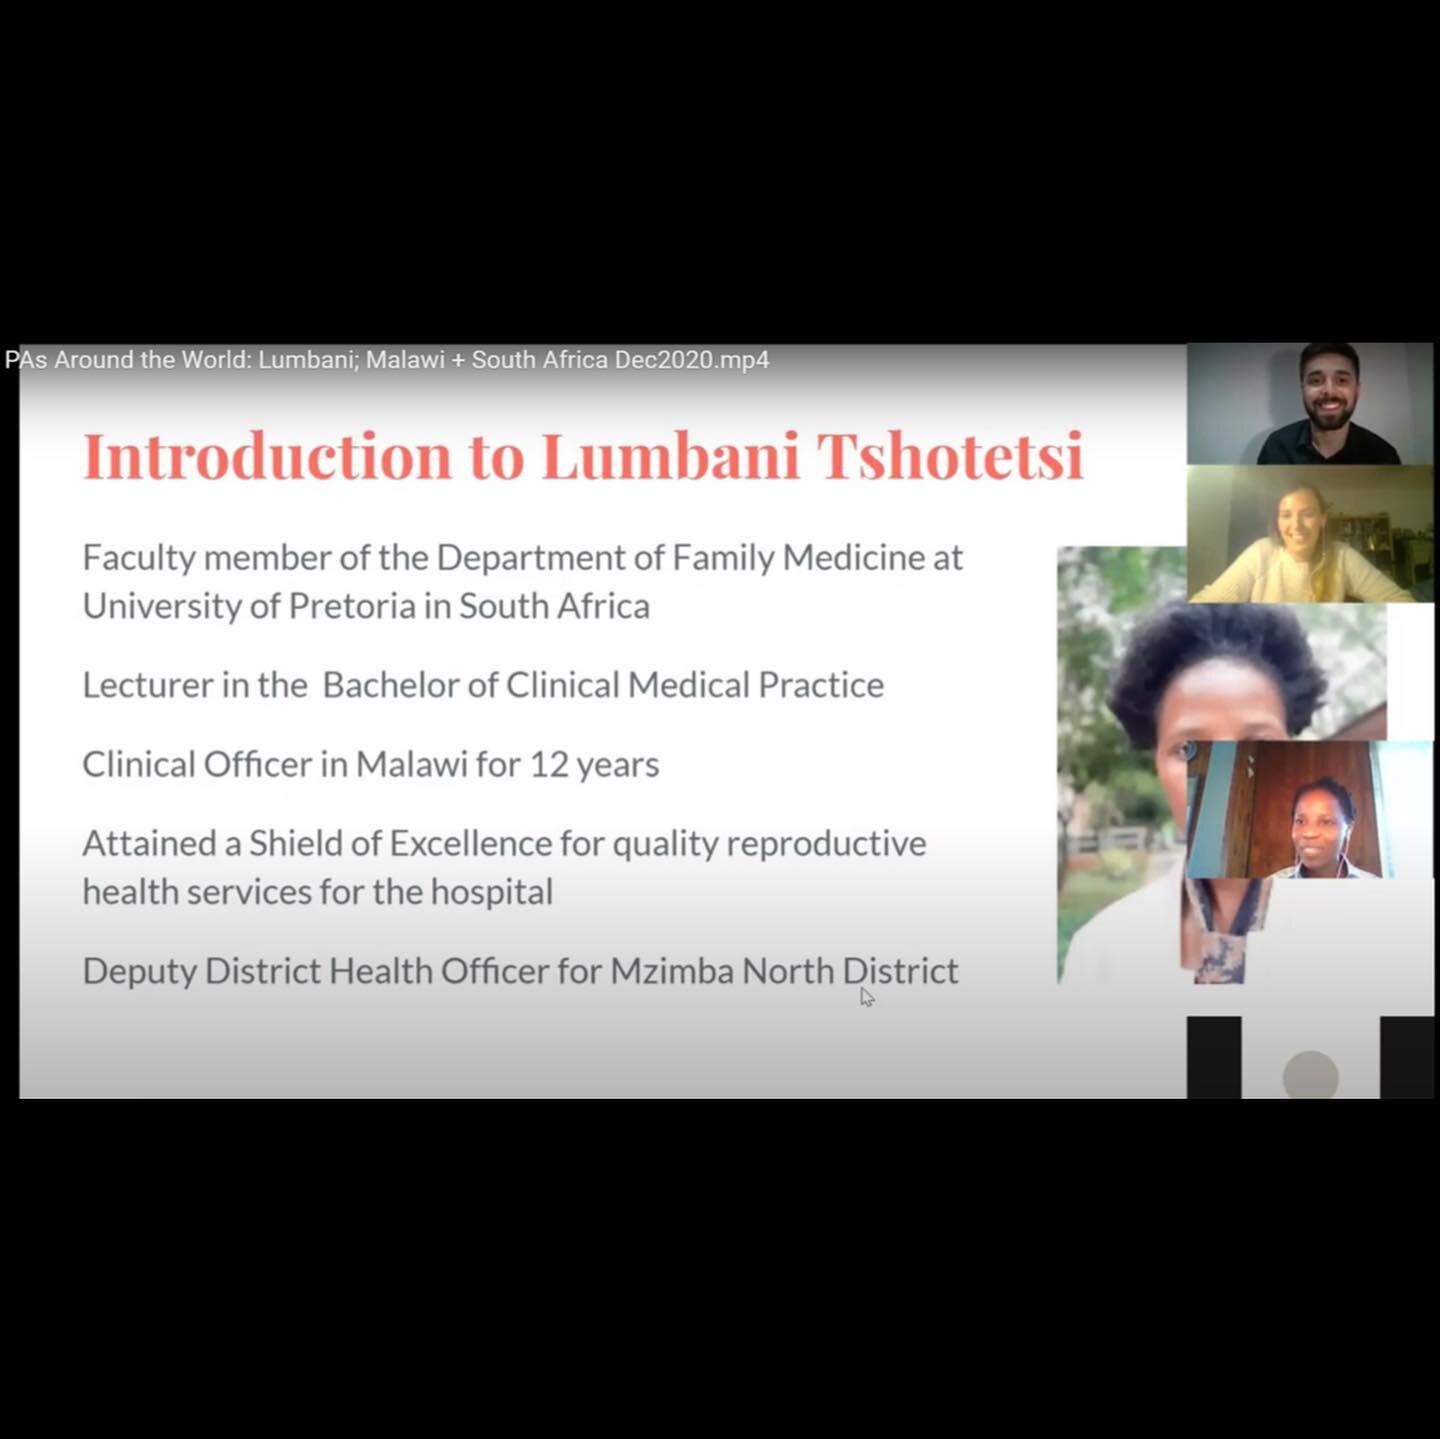 We are so honoured to have Madam Lumbani Tshotetsi, Clinical Associate from University of Pretoria South Africa, to come to our online IFPACS event &ldquo;PAs Around the World&rdquo; and share her experience as a Clinical Associate and her life journ